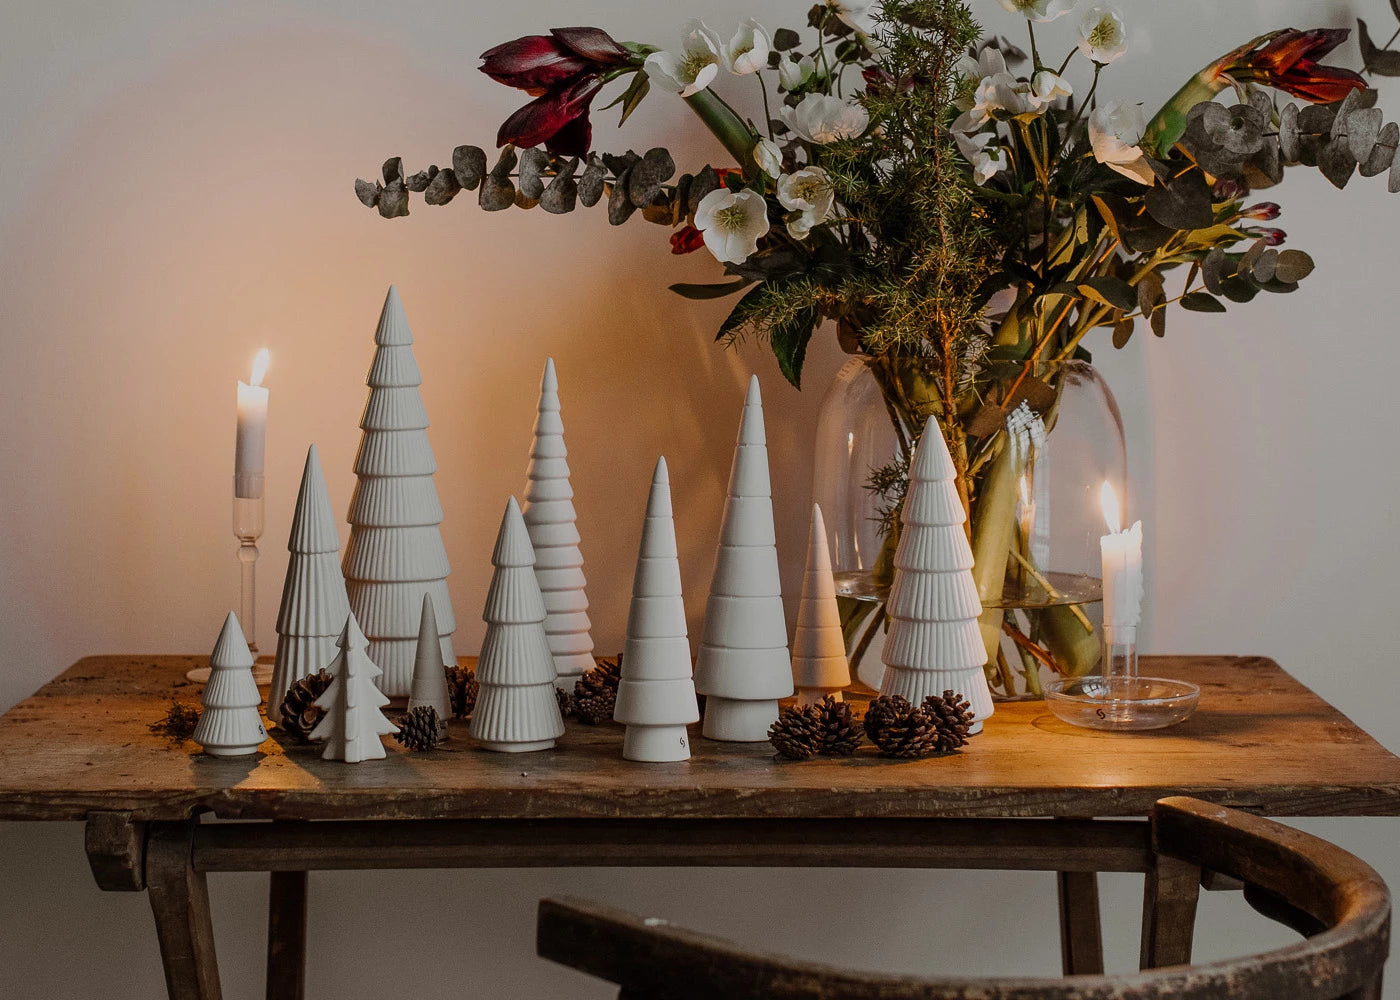 A wooden table decorated with various heights and shapes of white ceramic trees with a candle at each end and a bunch of winter foliage in a glass vase behind them